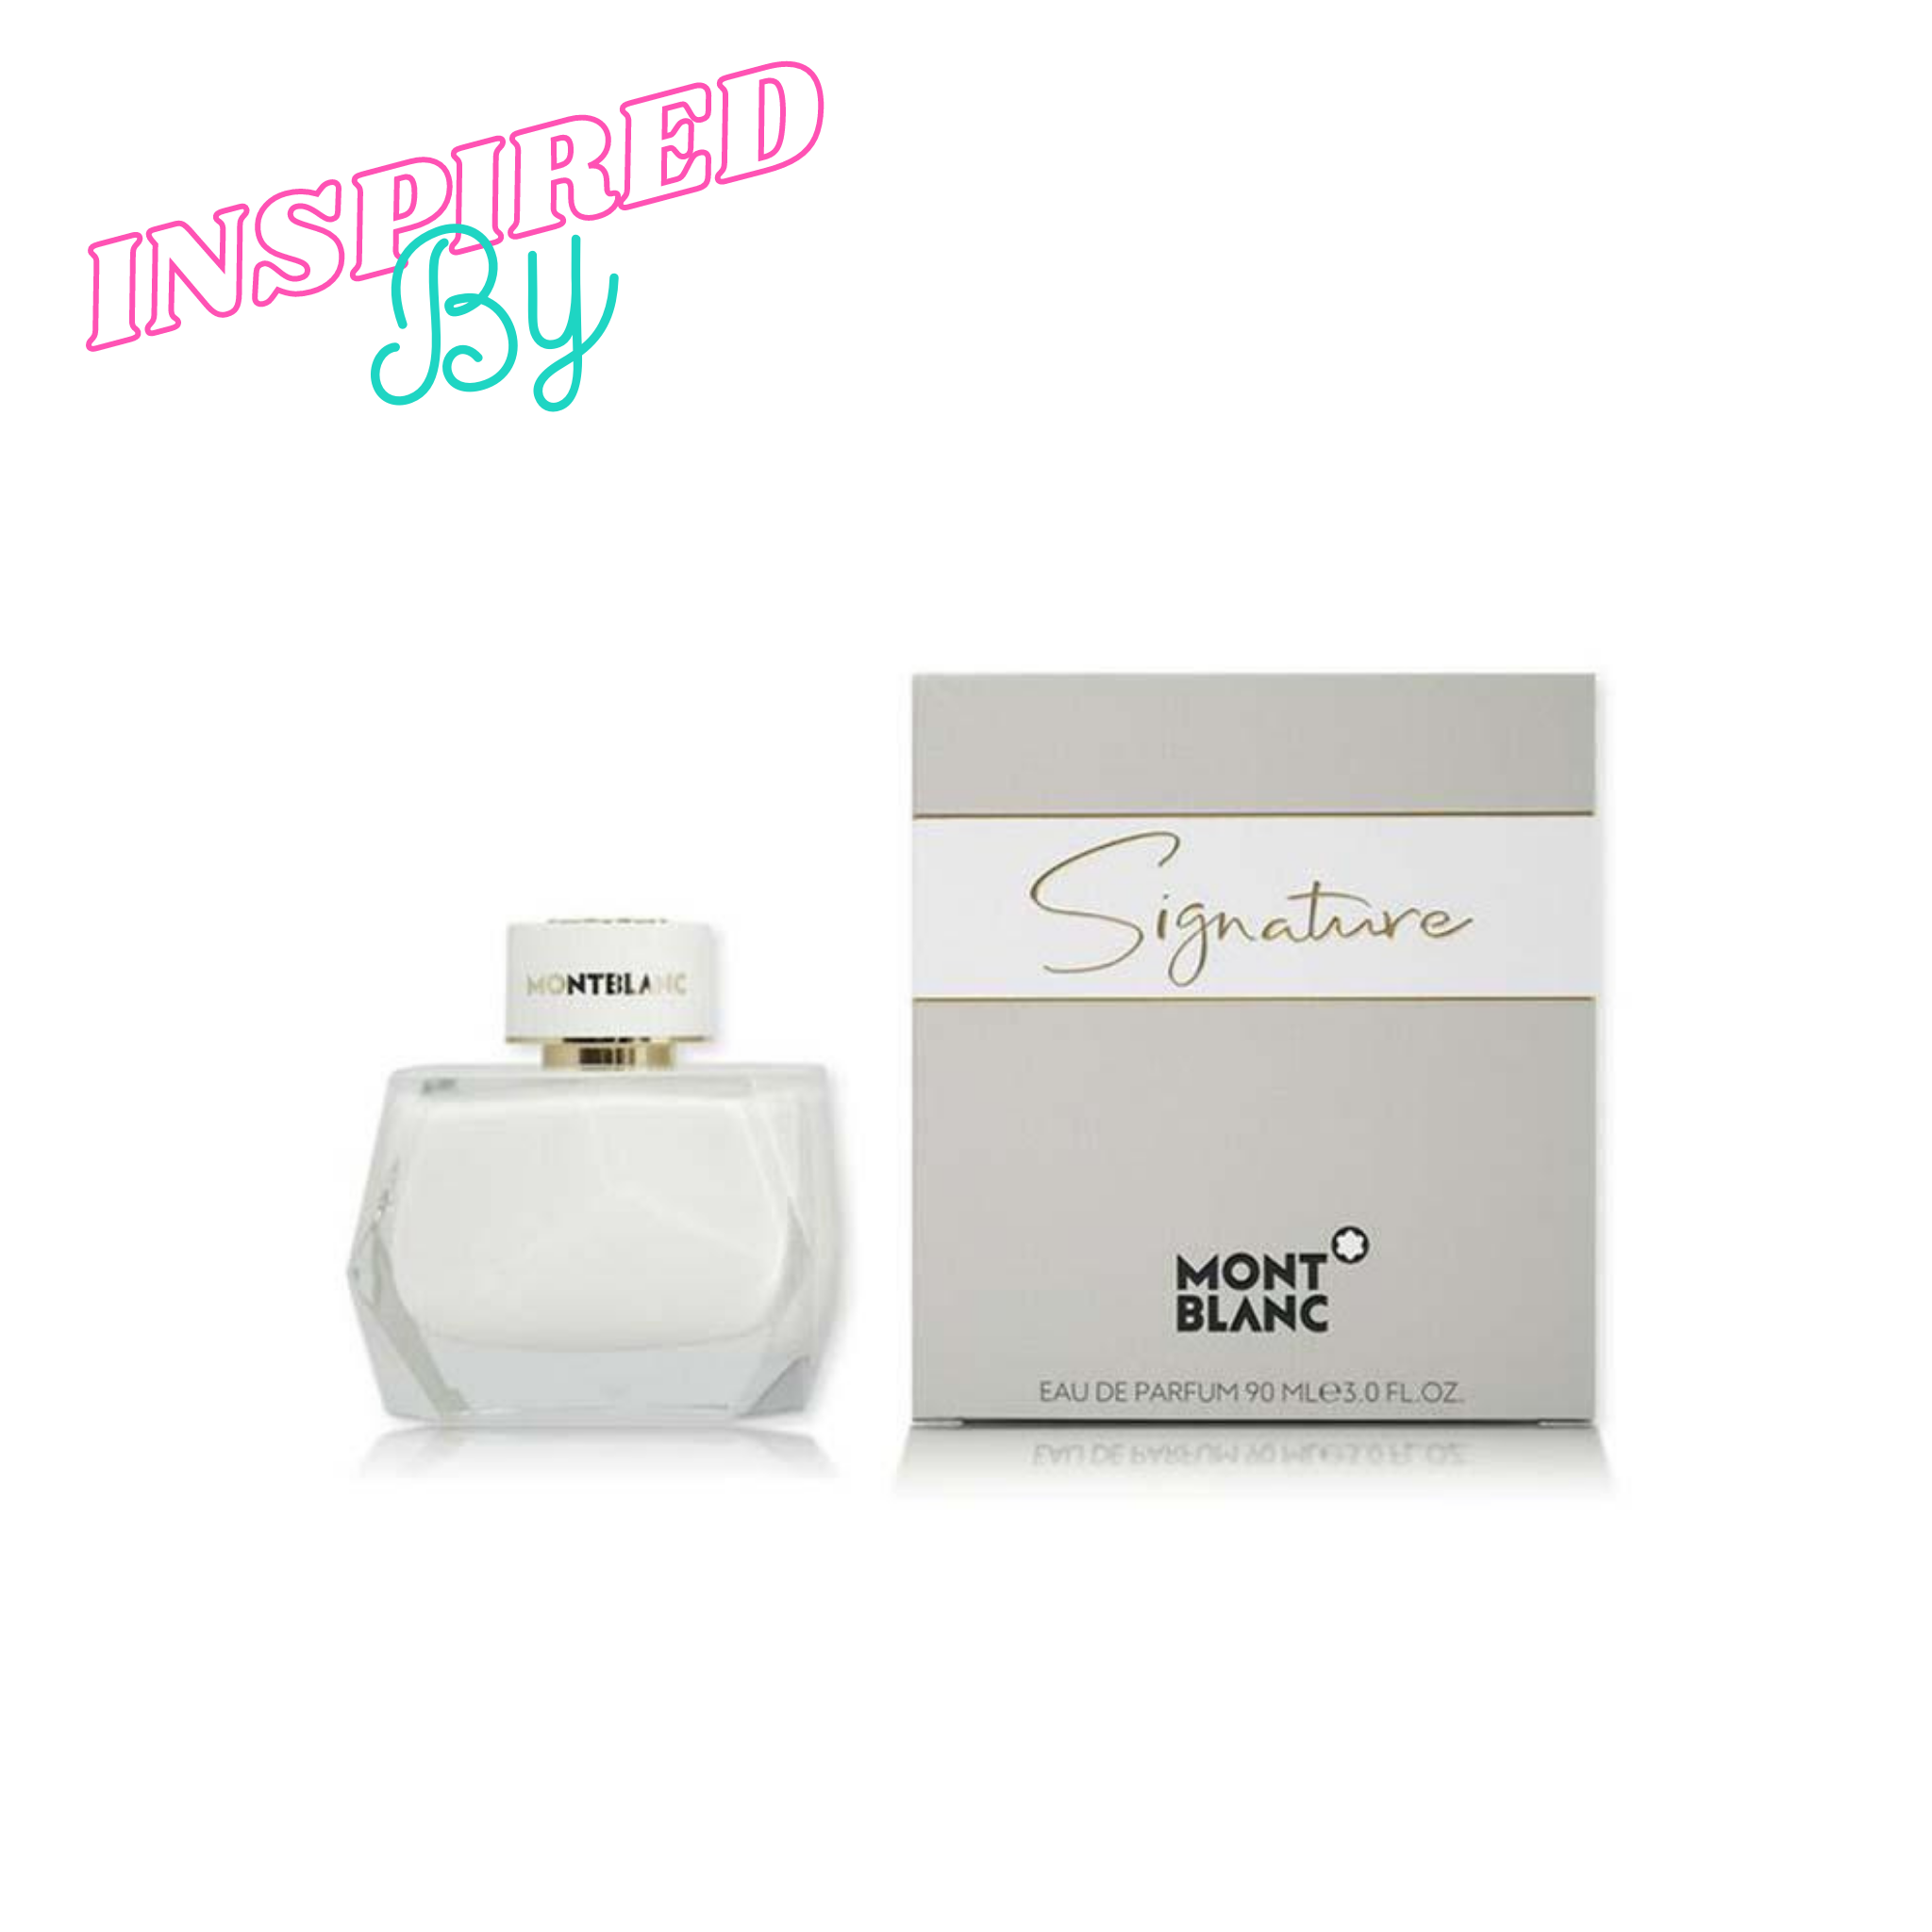 Inspired by Mont blanc Signature 100ml - Fragrance Deliver SA